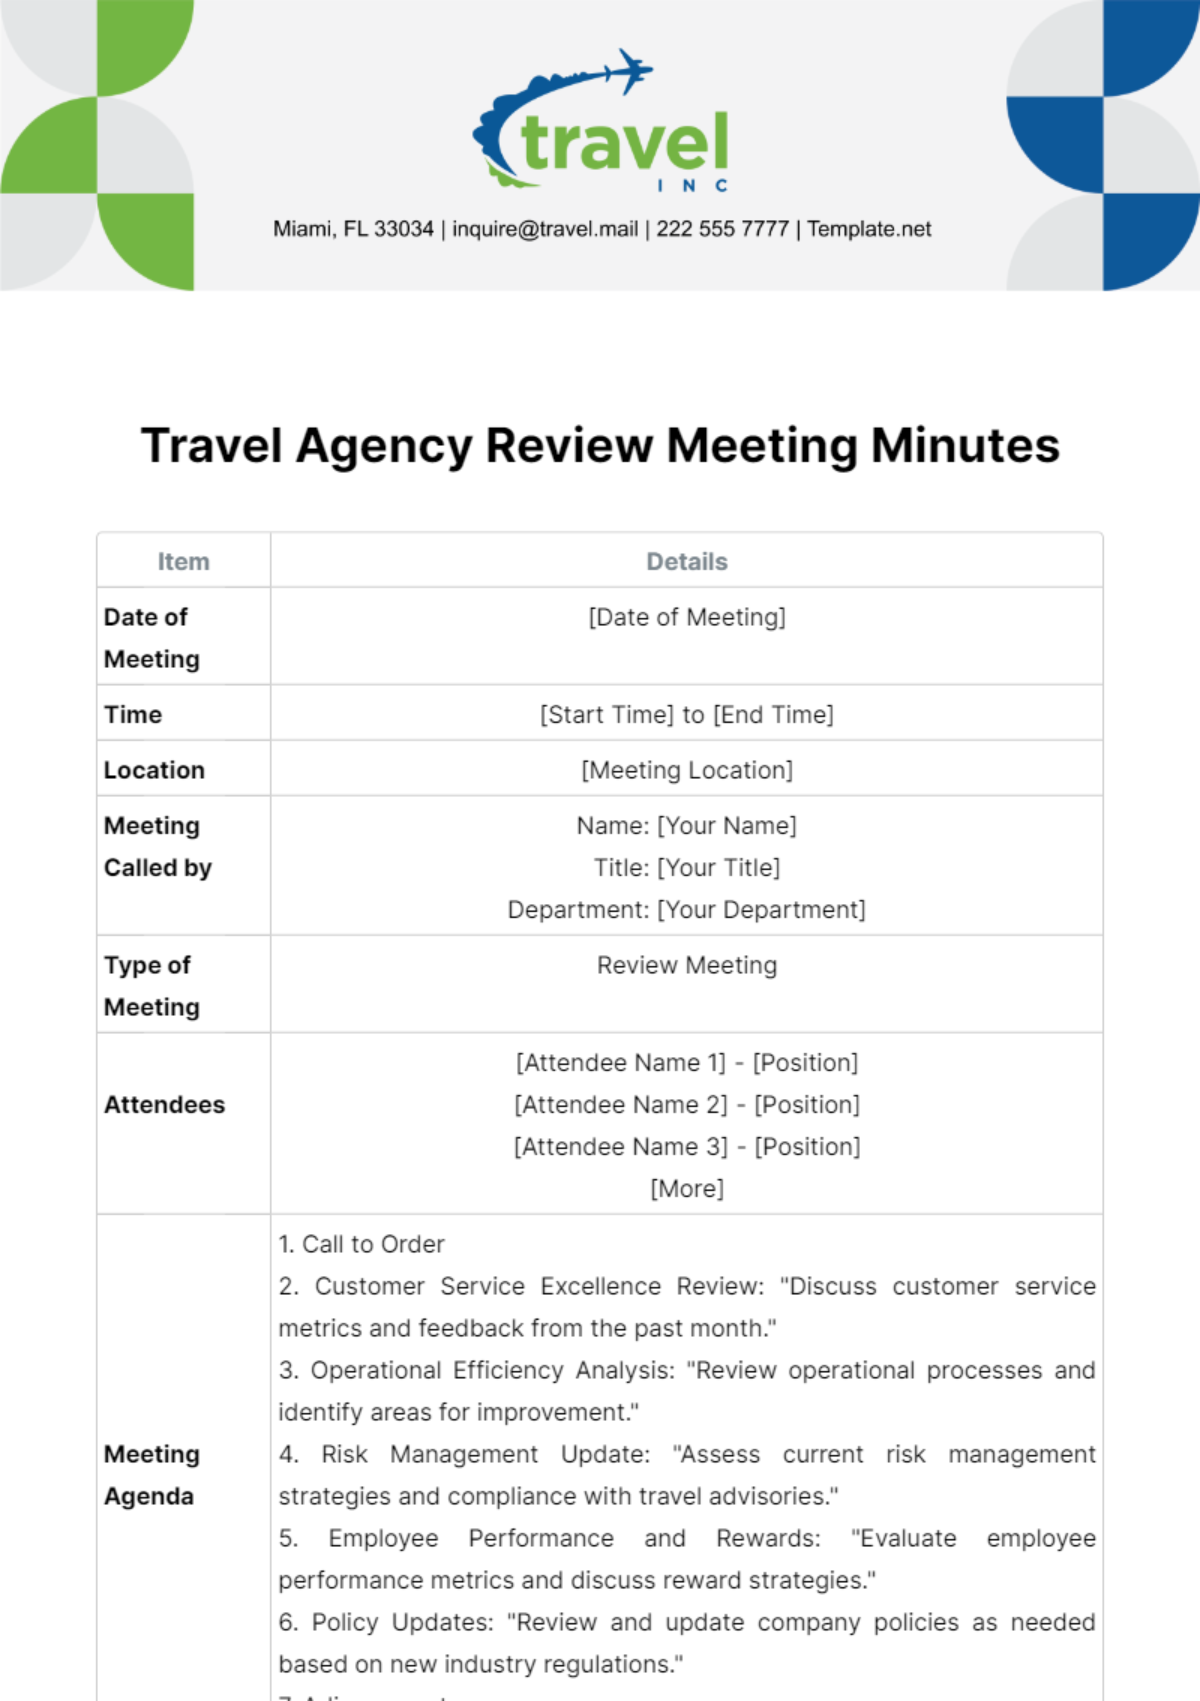 Free Travel Agency Review Meeting Minutes Template